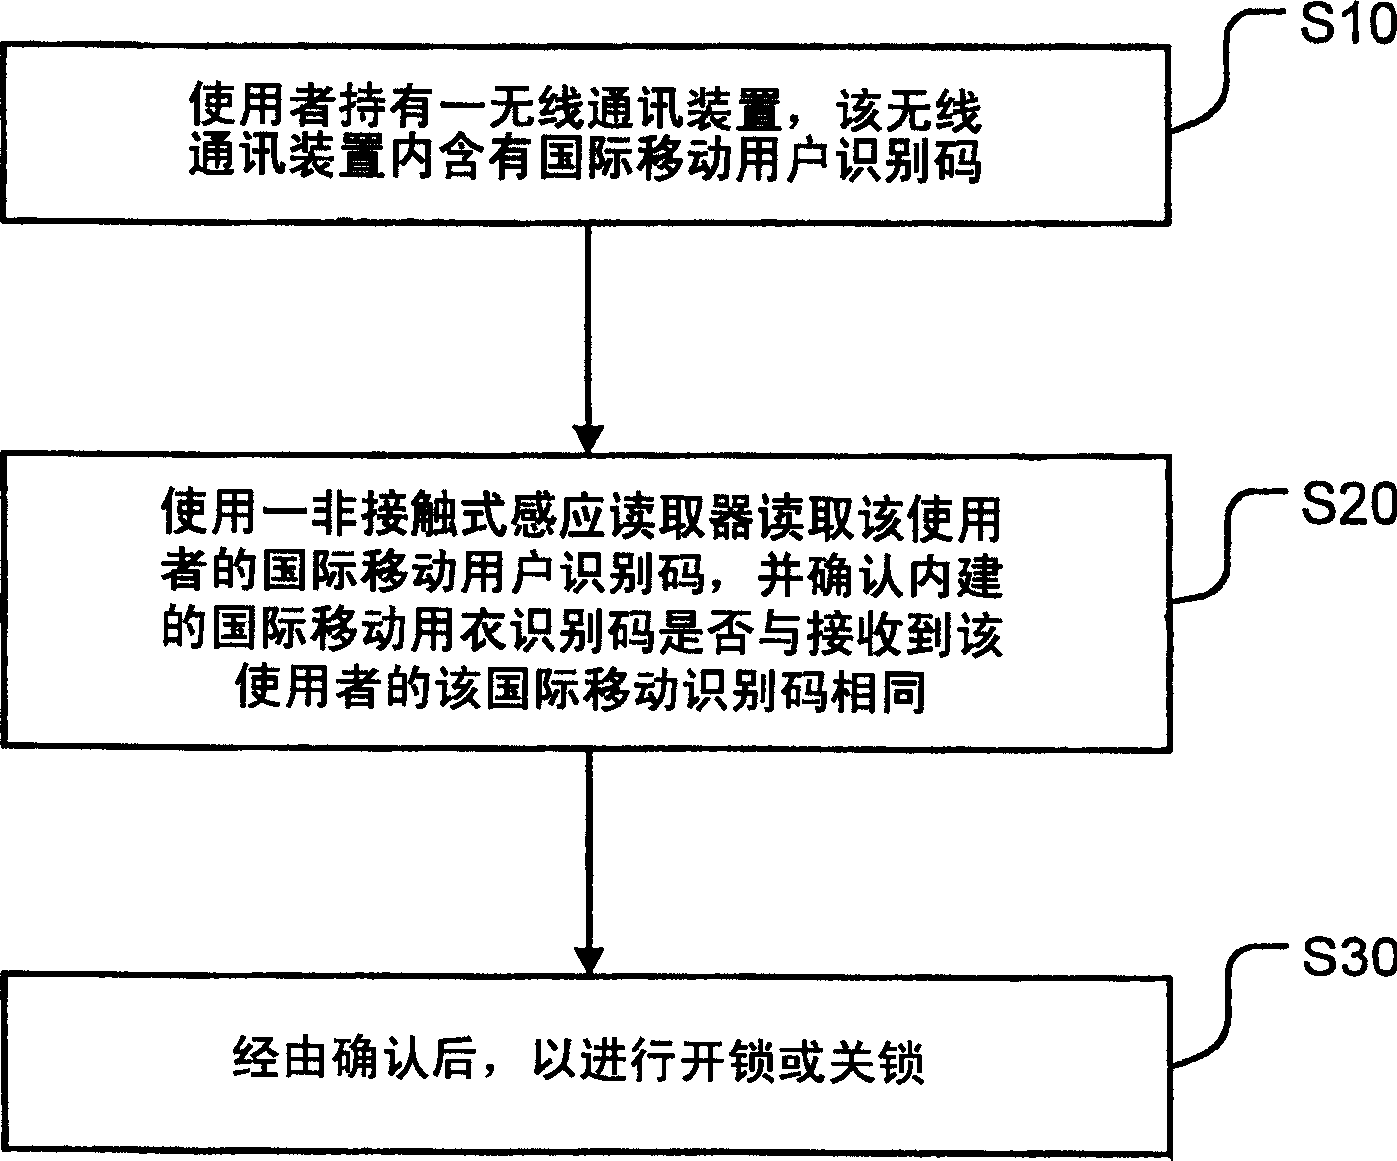 Method and equipment for finishing entrance guard authentication using wireless communication device